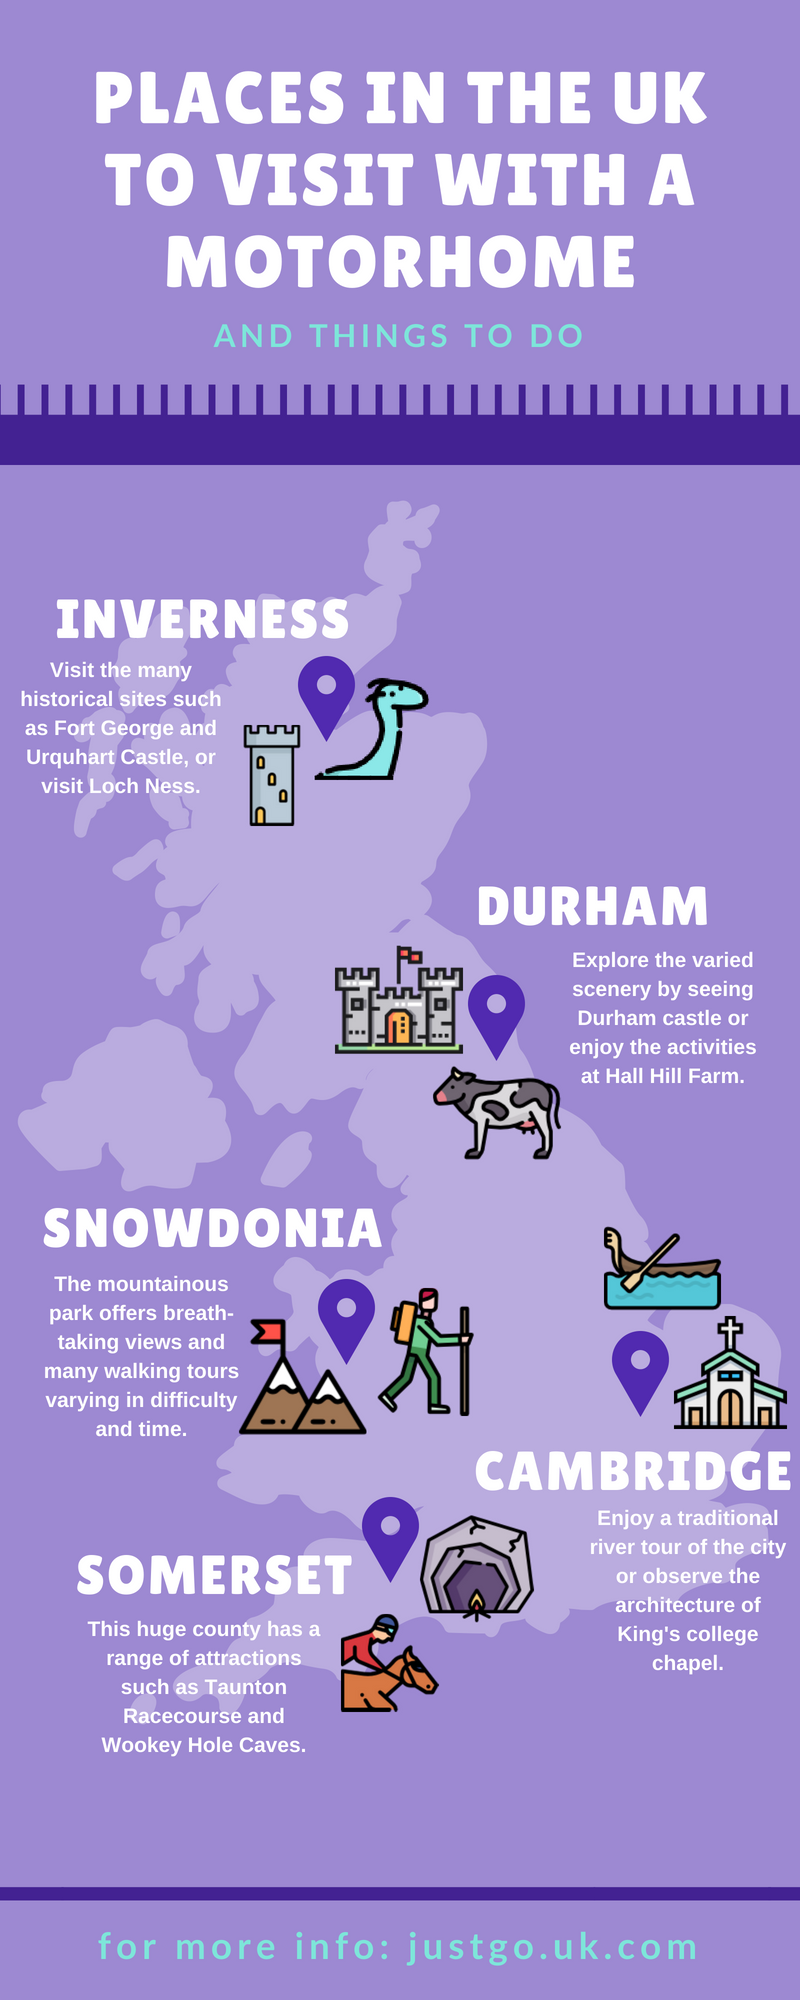 rv-hire-places-in-the-uk-infographic-galleryr